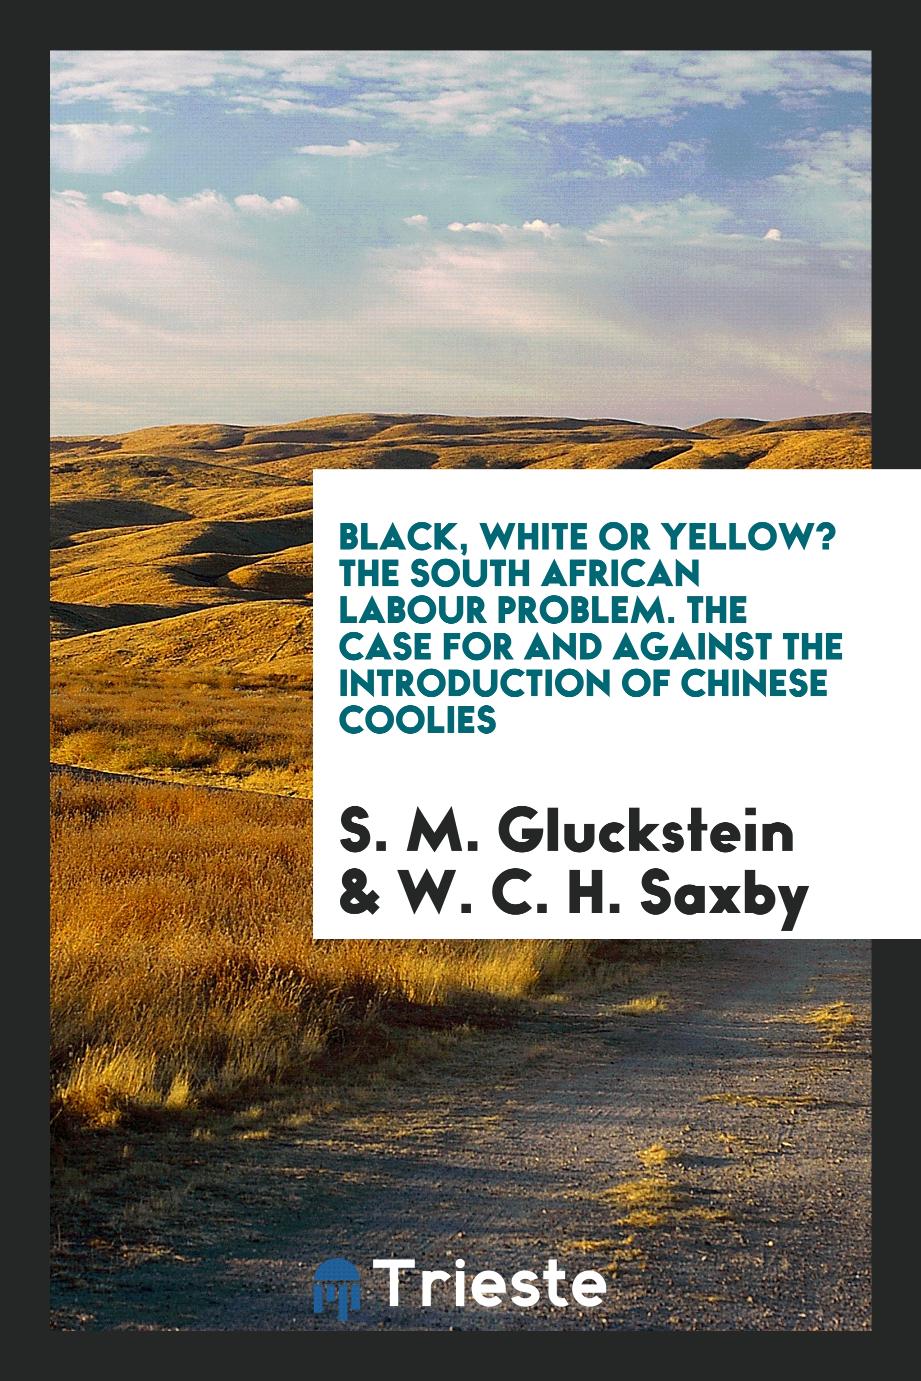 Black, White or Yellow? The South African Labour Problem. The Case for and Against the Introduction of Chinese Coolies